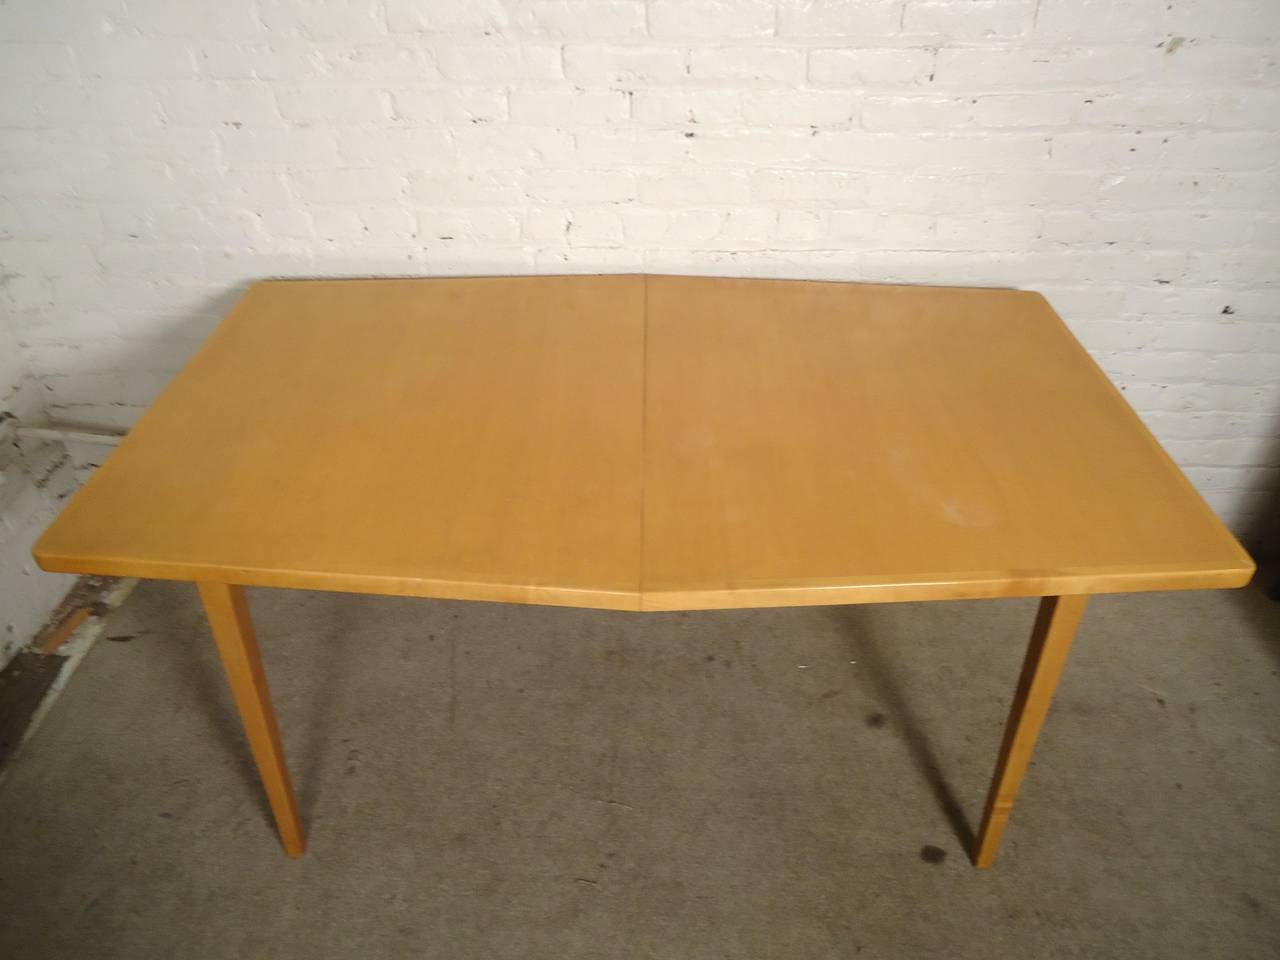 Unusual dining table designed by Jens Risom. Beautiful blonde maple grain, unique hexagon shape. Comes with two leaves to extend to 8 feet long.
Chairs pictured are not part of this listing, but are available for a limited time.

(Please confirm